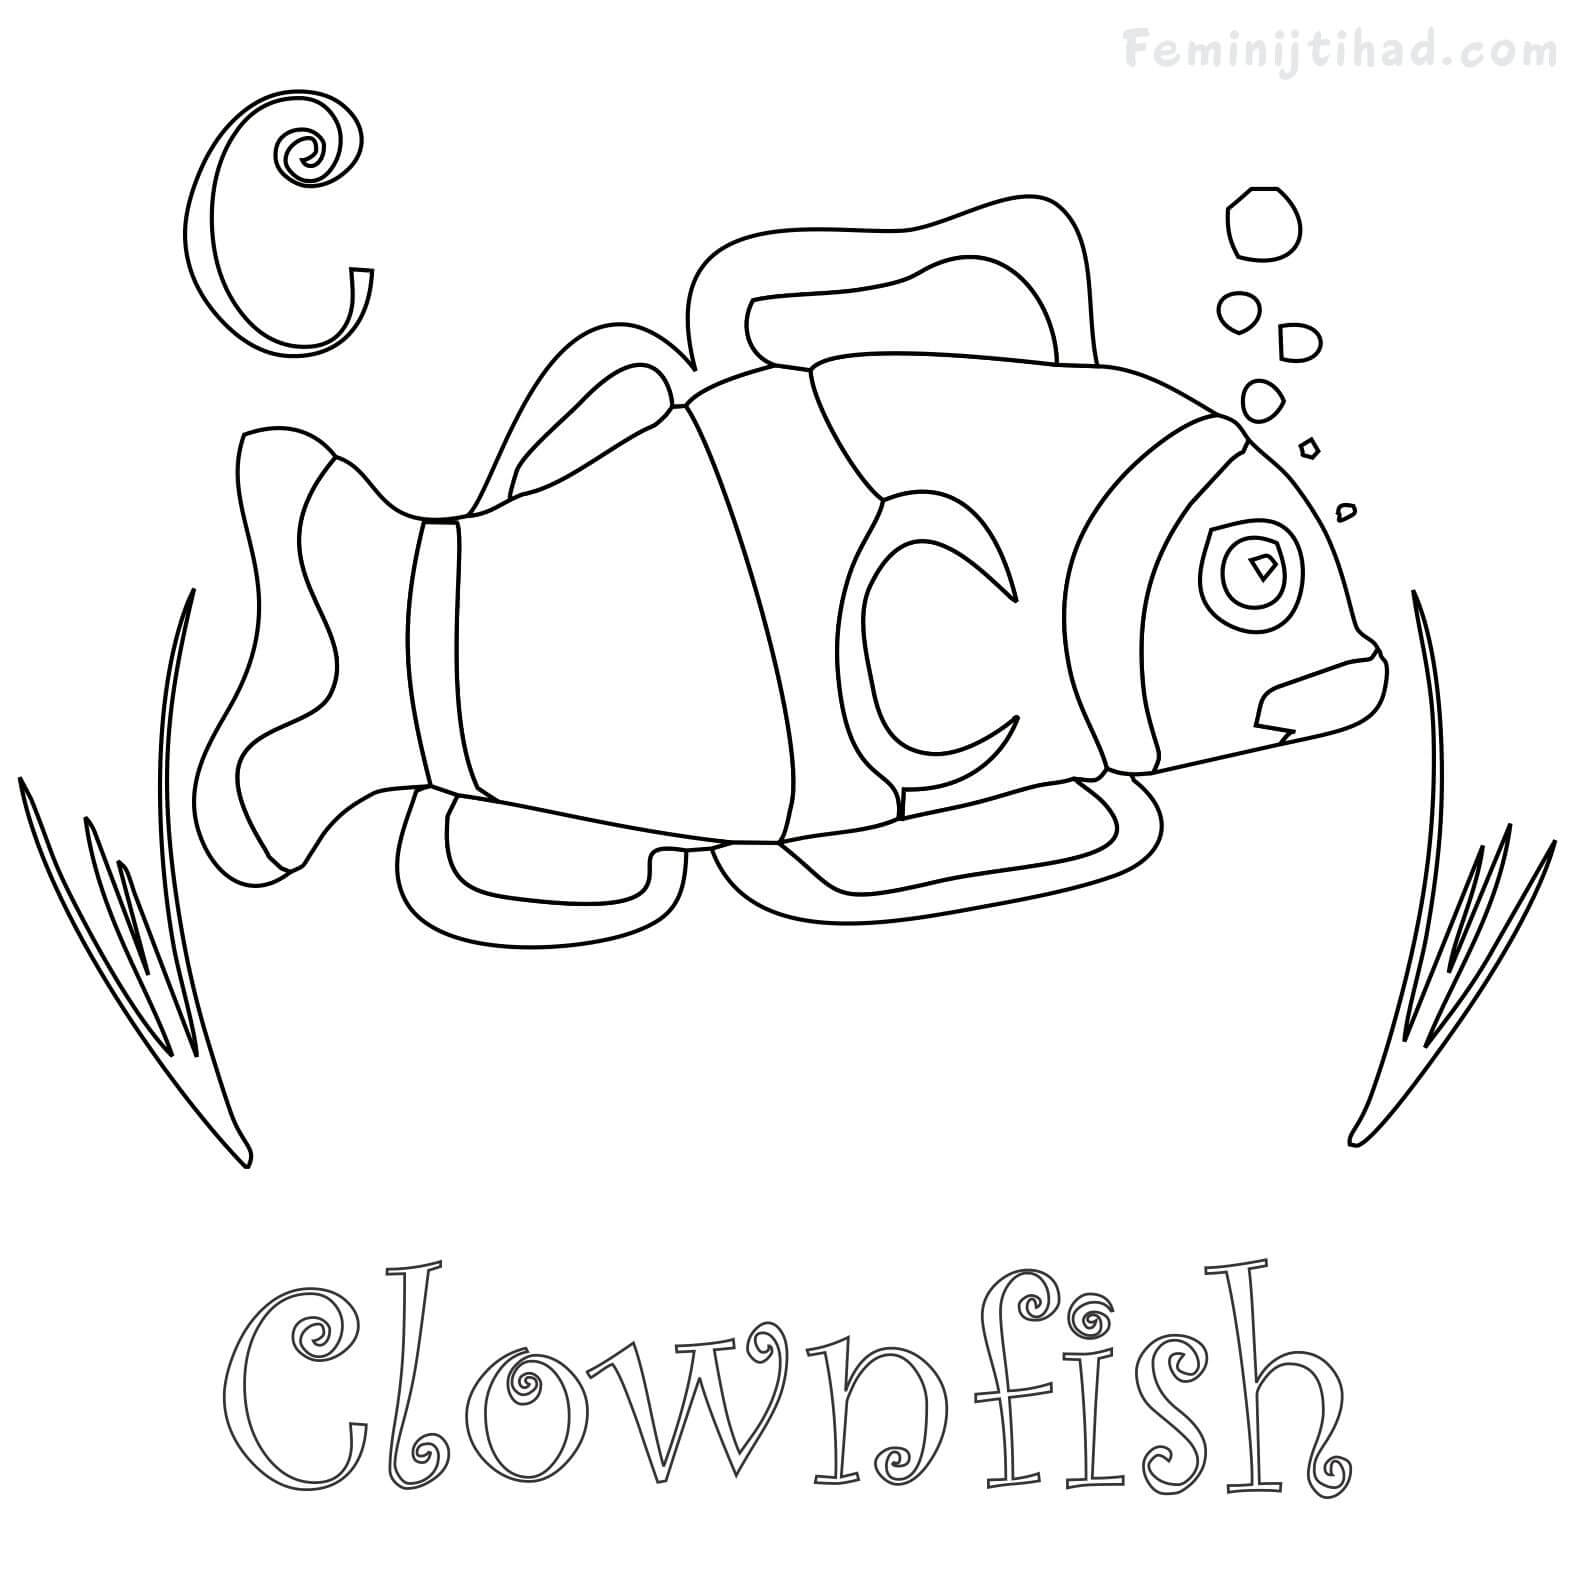 coloring page of clown fish